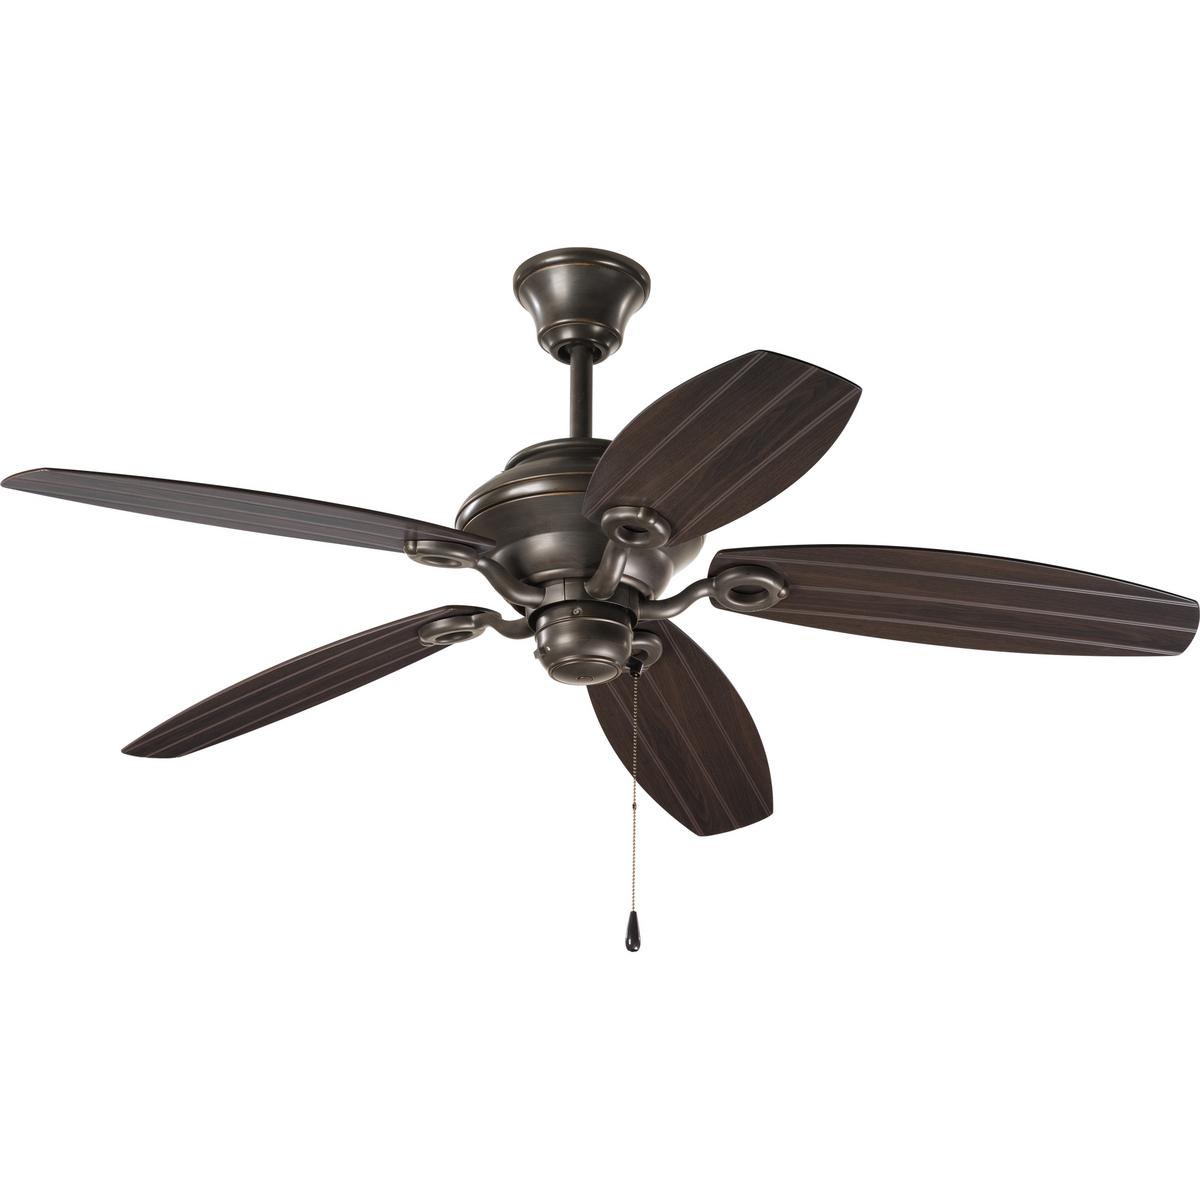 Hubbell P2533-20 54 inch five-blade Patio Fan with Toasted Oak blades and an Antique Bronze finish. The AirPro Indoor/Outdoor ceiling fan offers great performance and value with a powerful, 3-speed motor that can be reversed to provide year-round comfort. Includes innovat